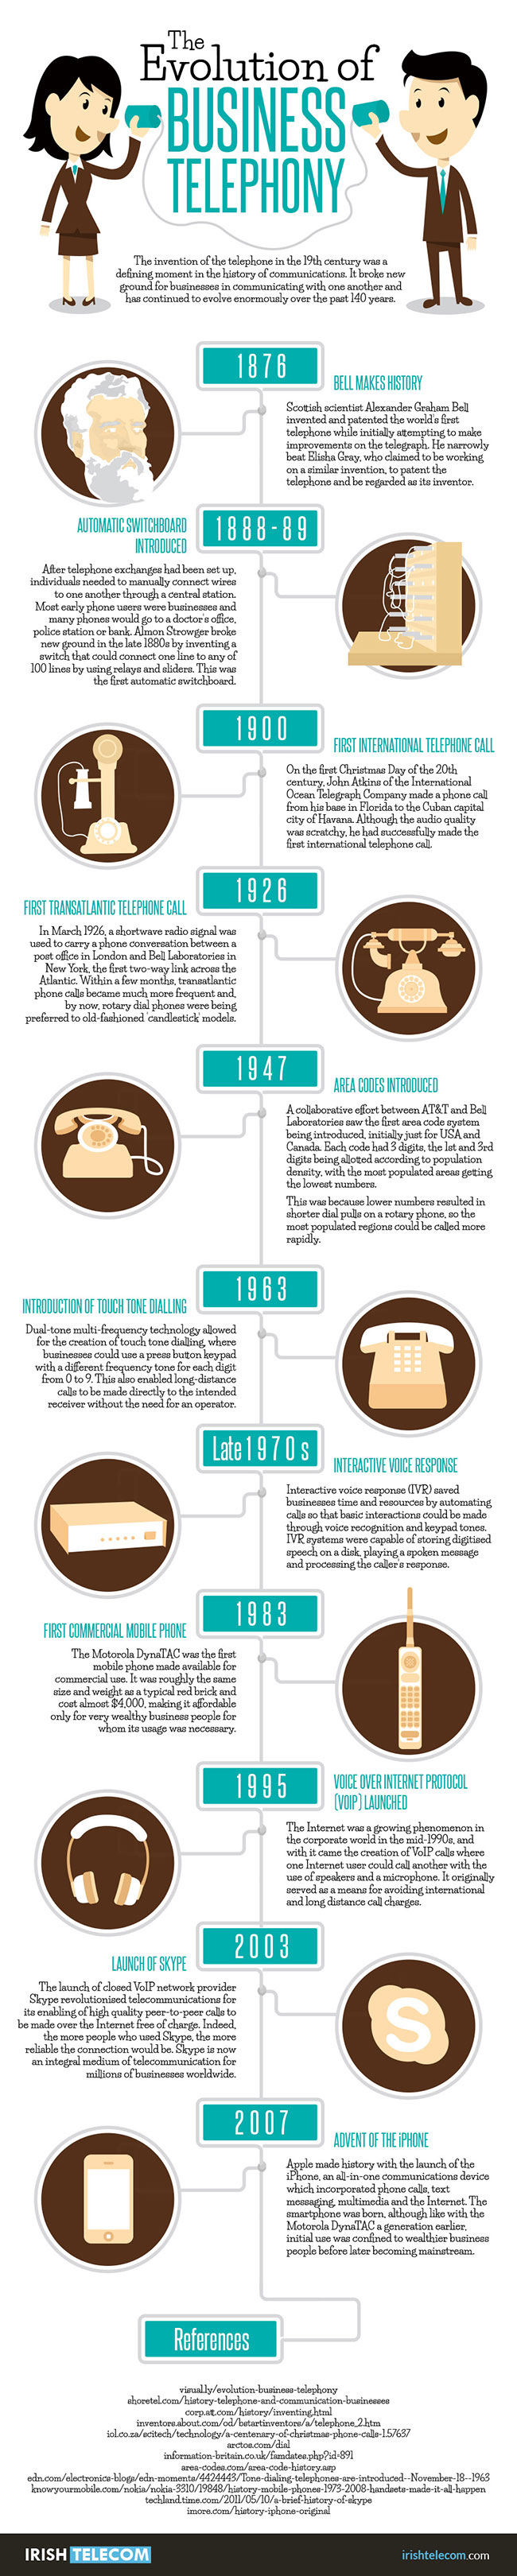 The evolution of business telephony in chronological order